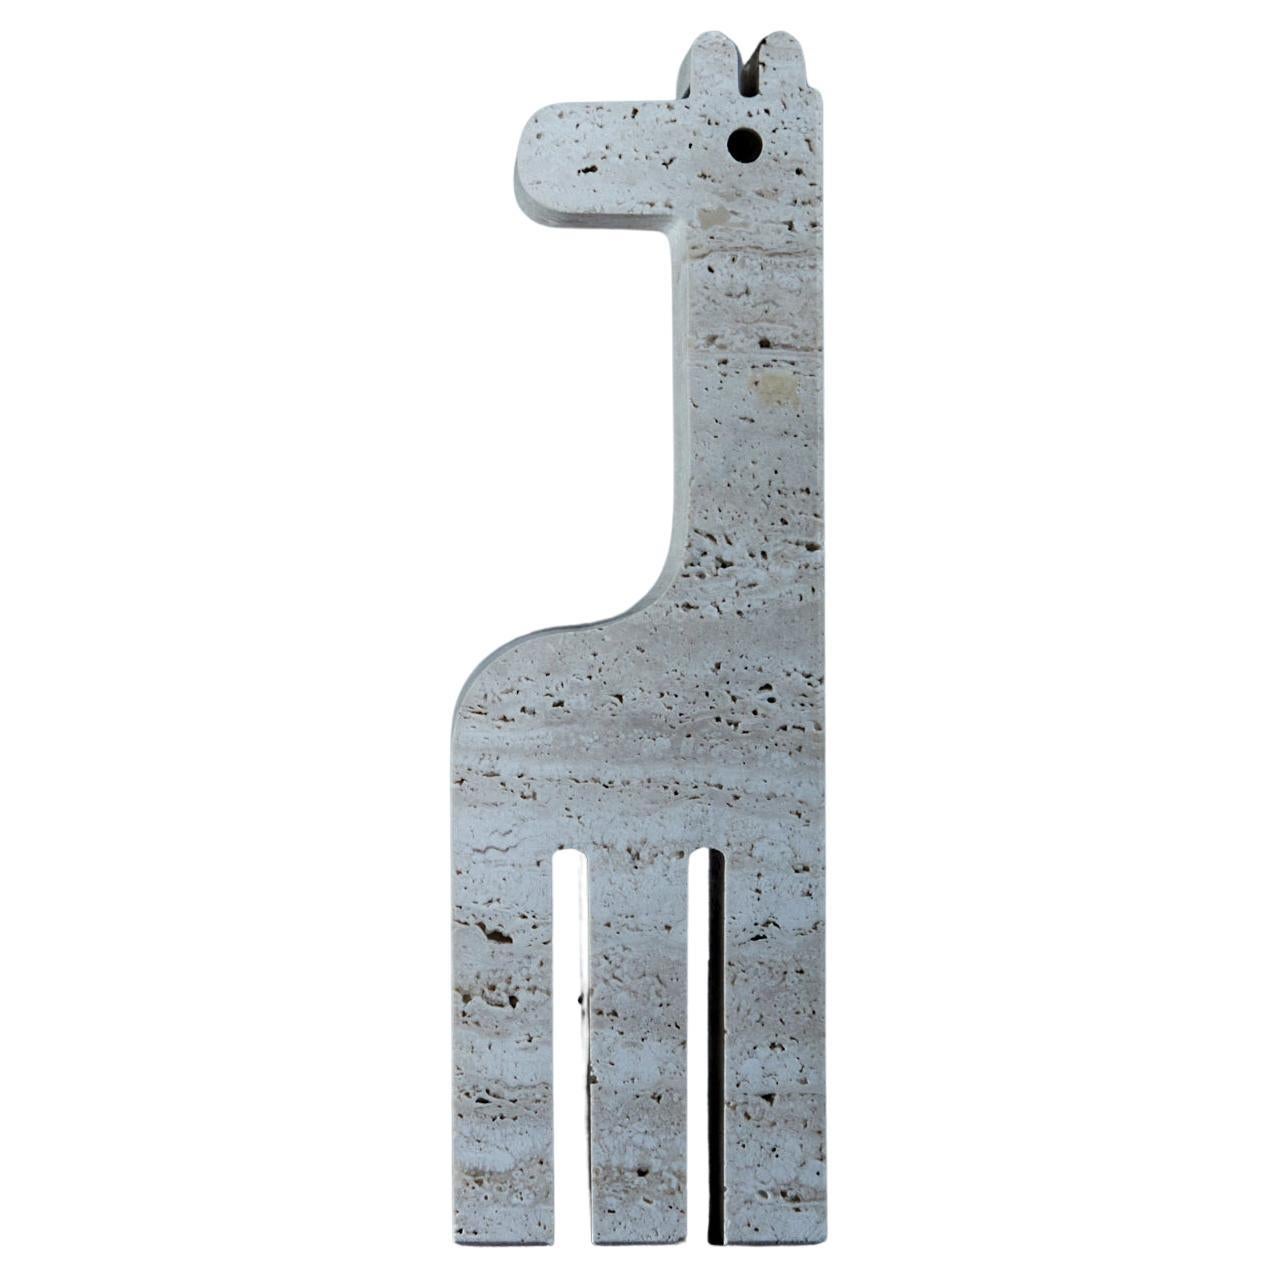 Giraffe figurine made of travertine marble by Fratelli Mannelli For Sale